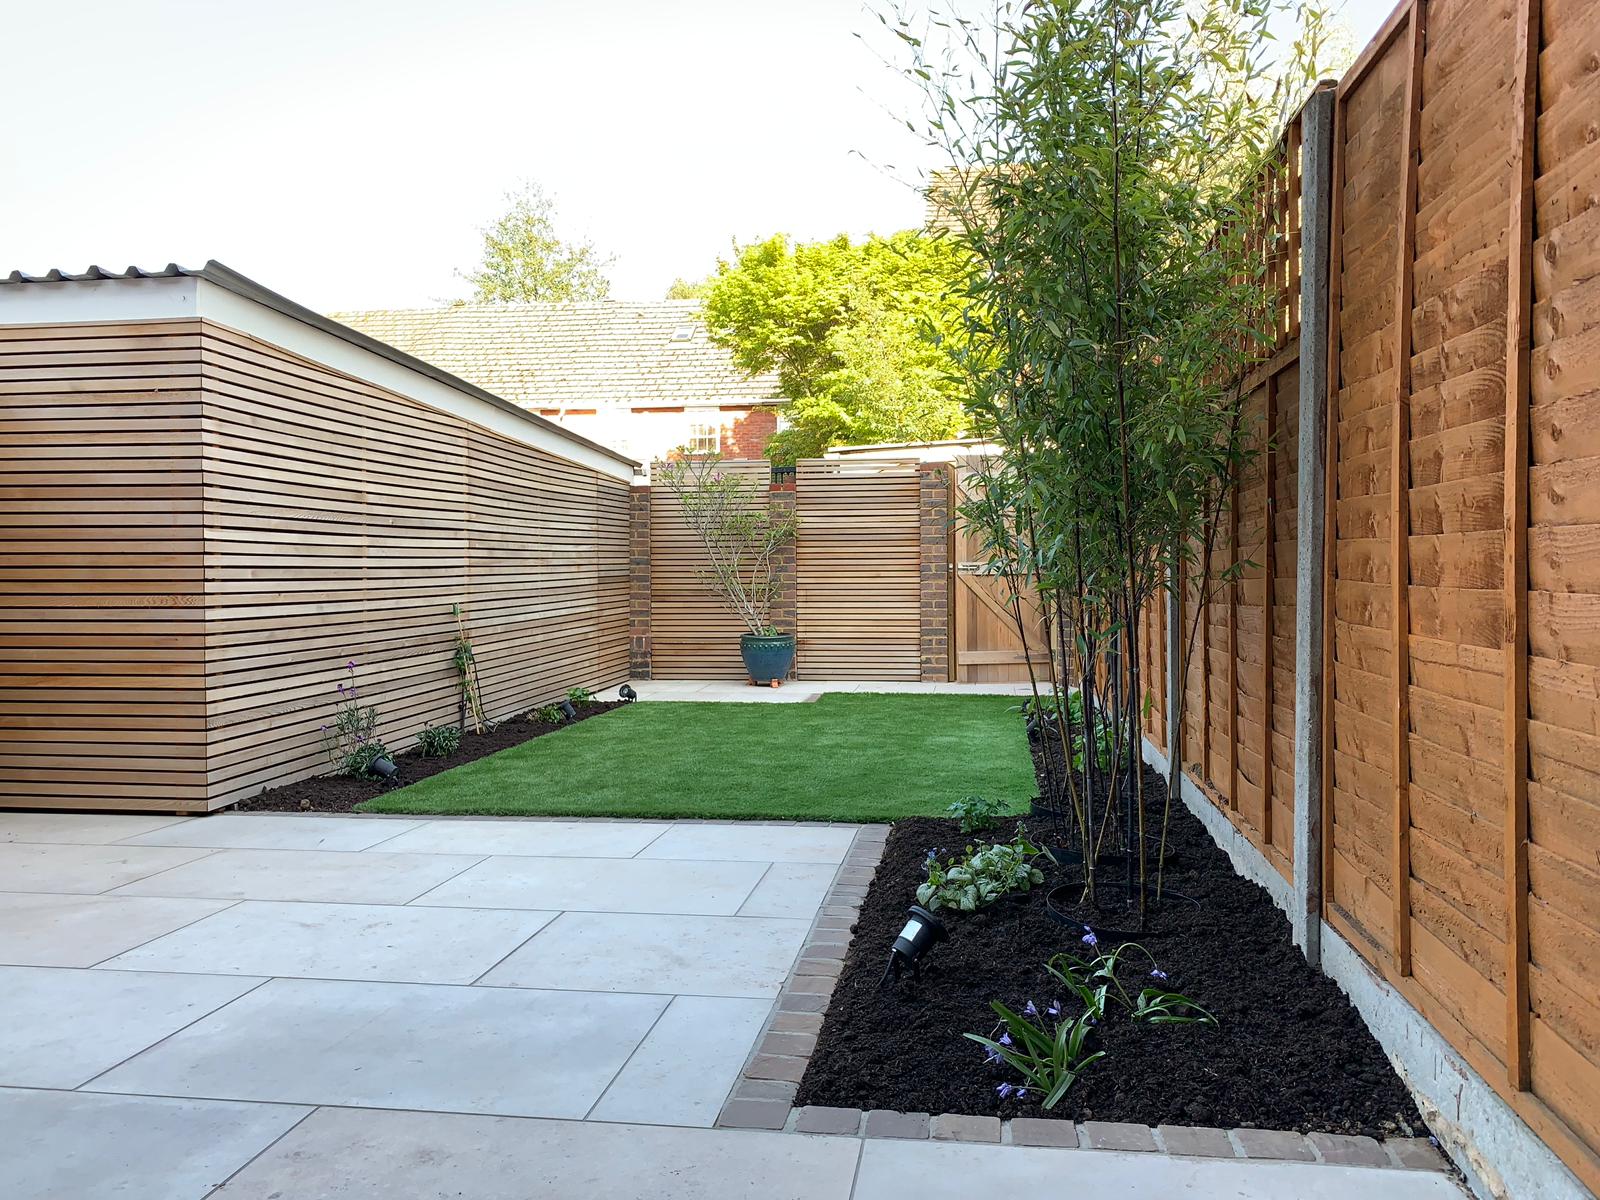 </p> <p>Find your ideal home design pro on designfor-me.com - get matched and see who's interested in your home project. Click image to see more inspiration from our design pros</p> <p>Design by Dave, garden designer from Lambeth, London</p> <p> #gardendesign #gardeninspiration #gardenlove #gardenideas #gardens </p> <p>